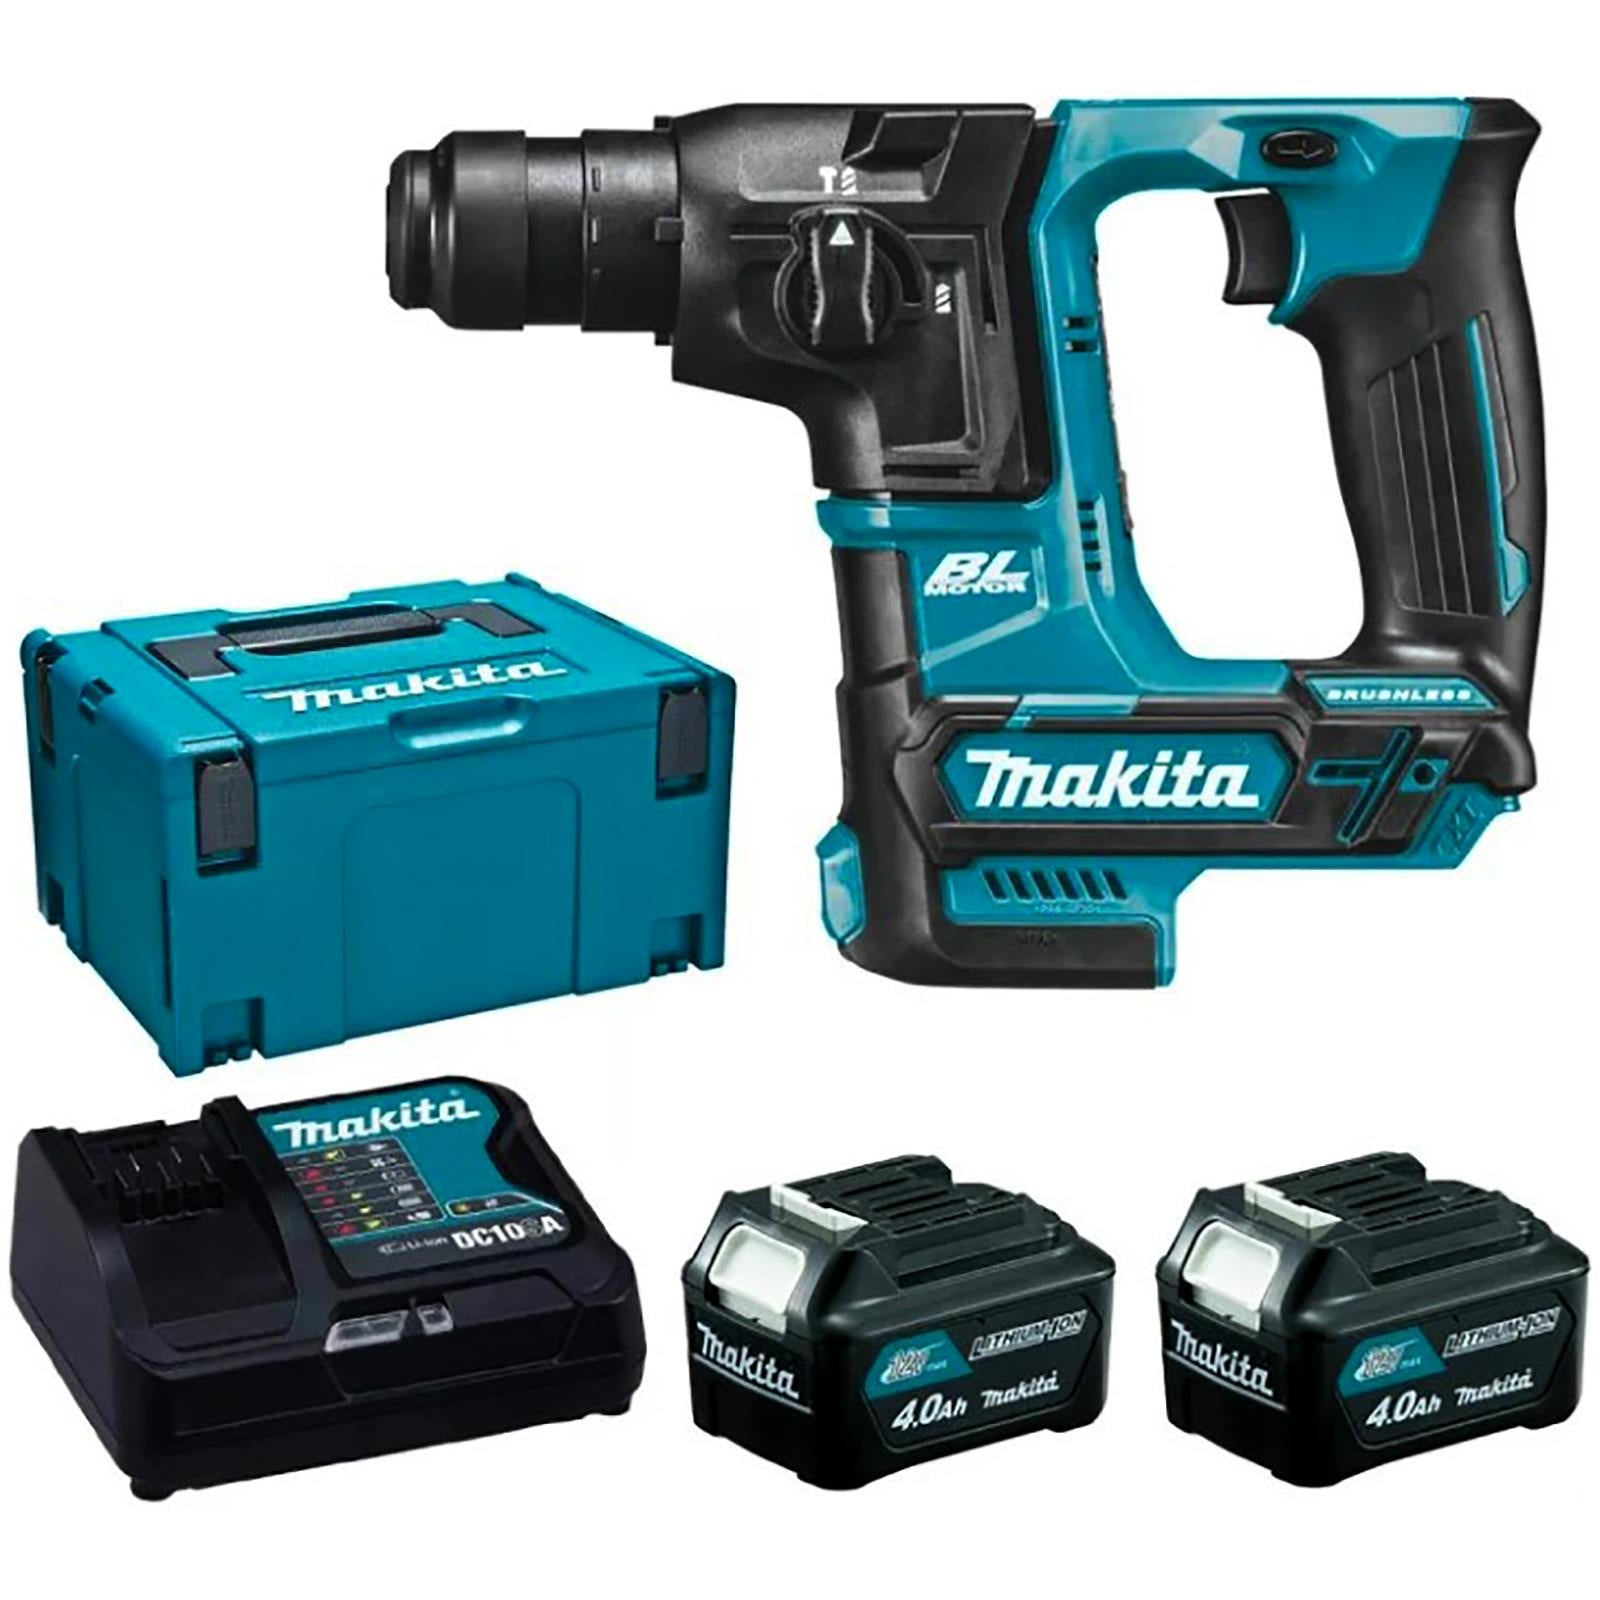 Makita Rotary Hammer Drill Set SDS+ Plus Compact Brushless CXT 2 x 4Ah Battery Charger Makpac Case